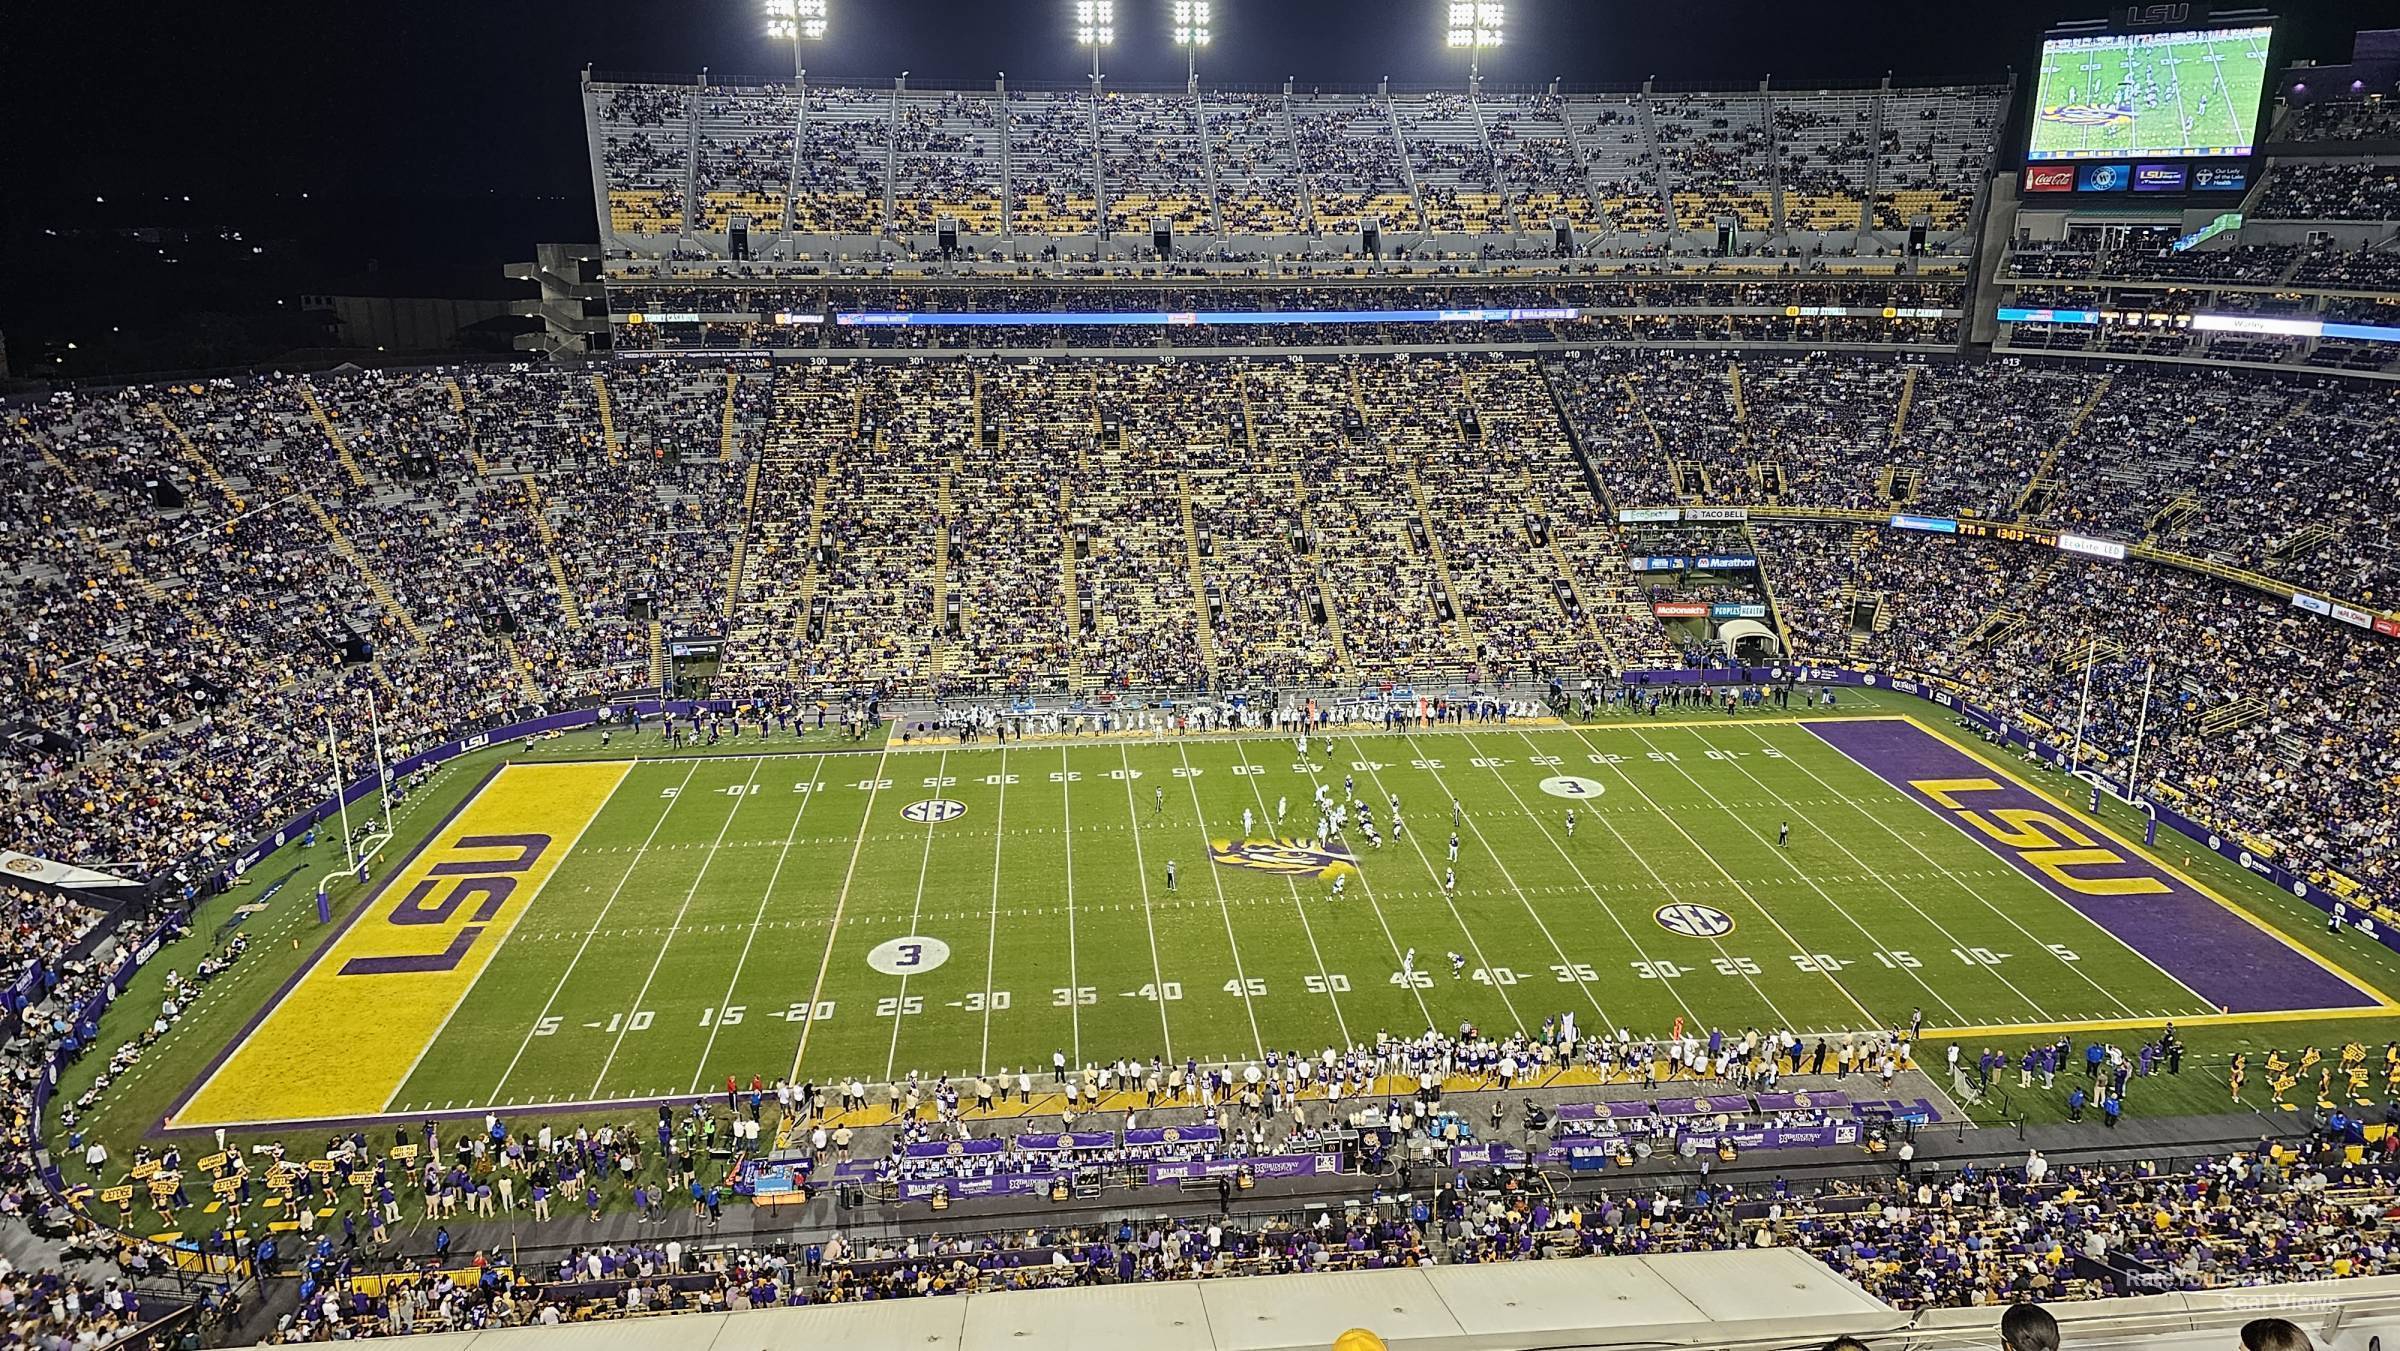 section 616, row 1 seat view  - tiger stadium